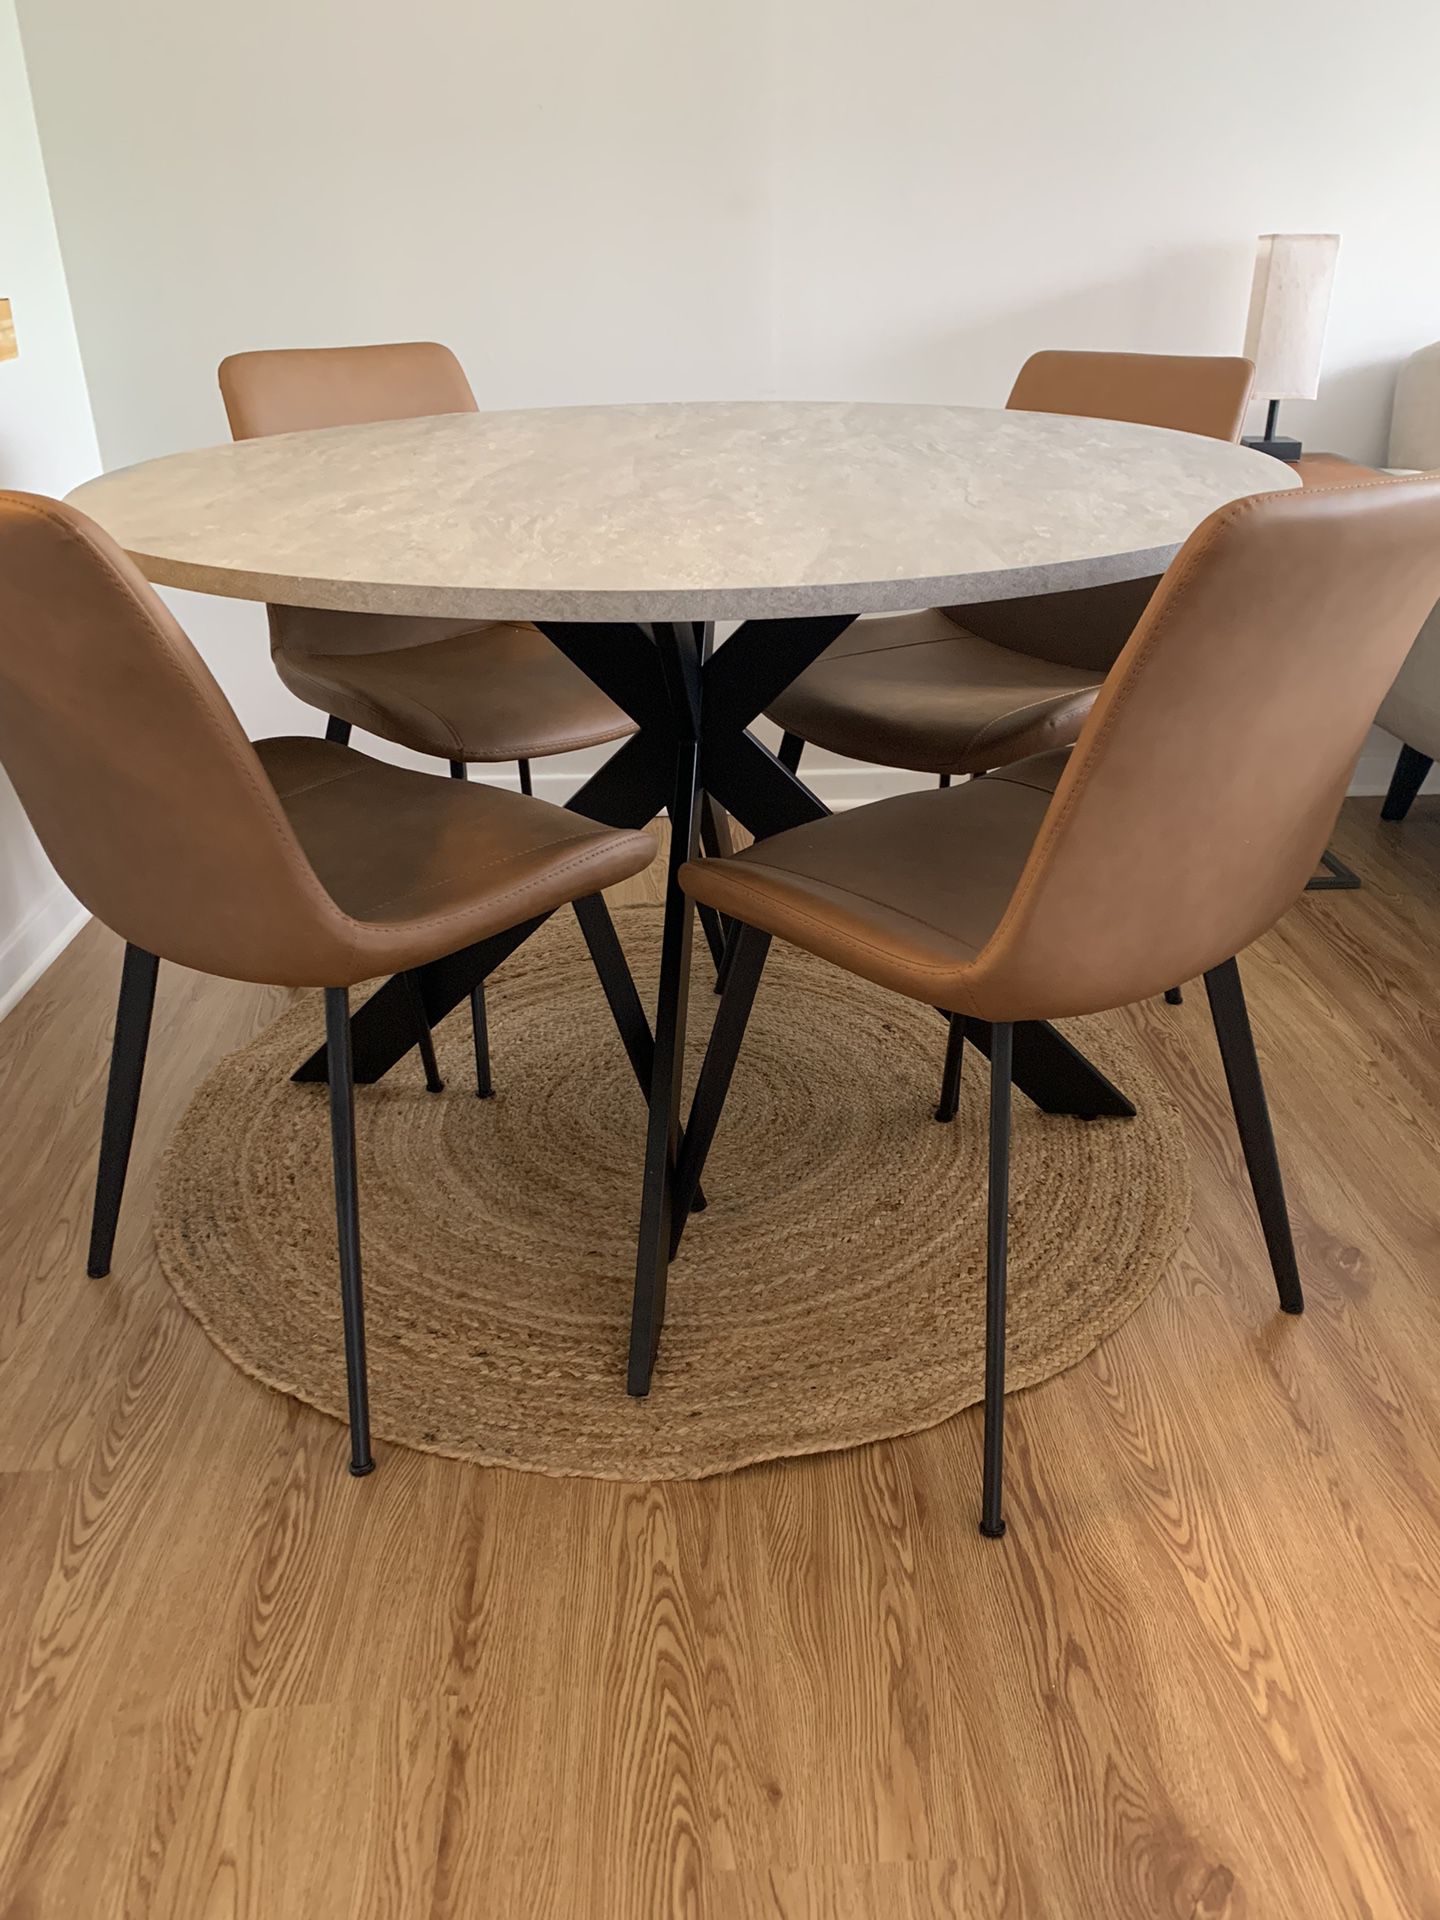 Round Dining Table (no chairs)